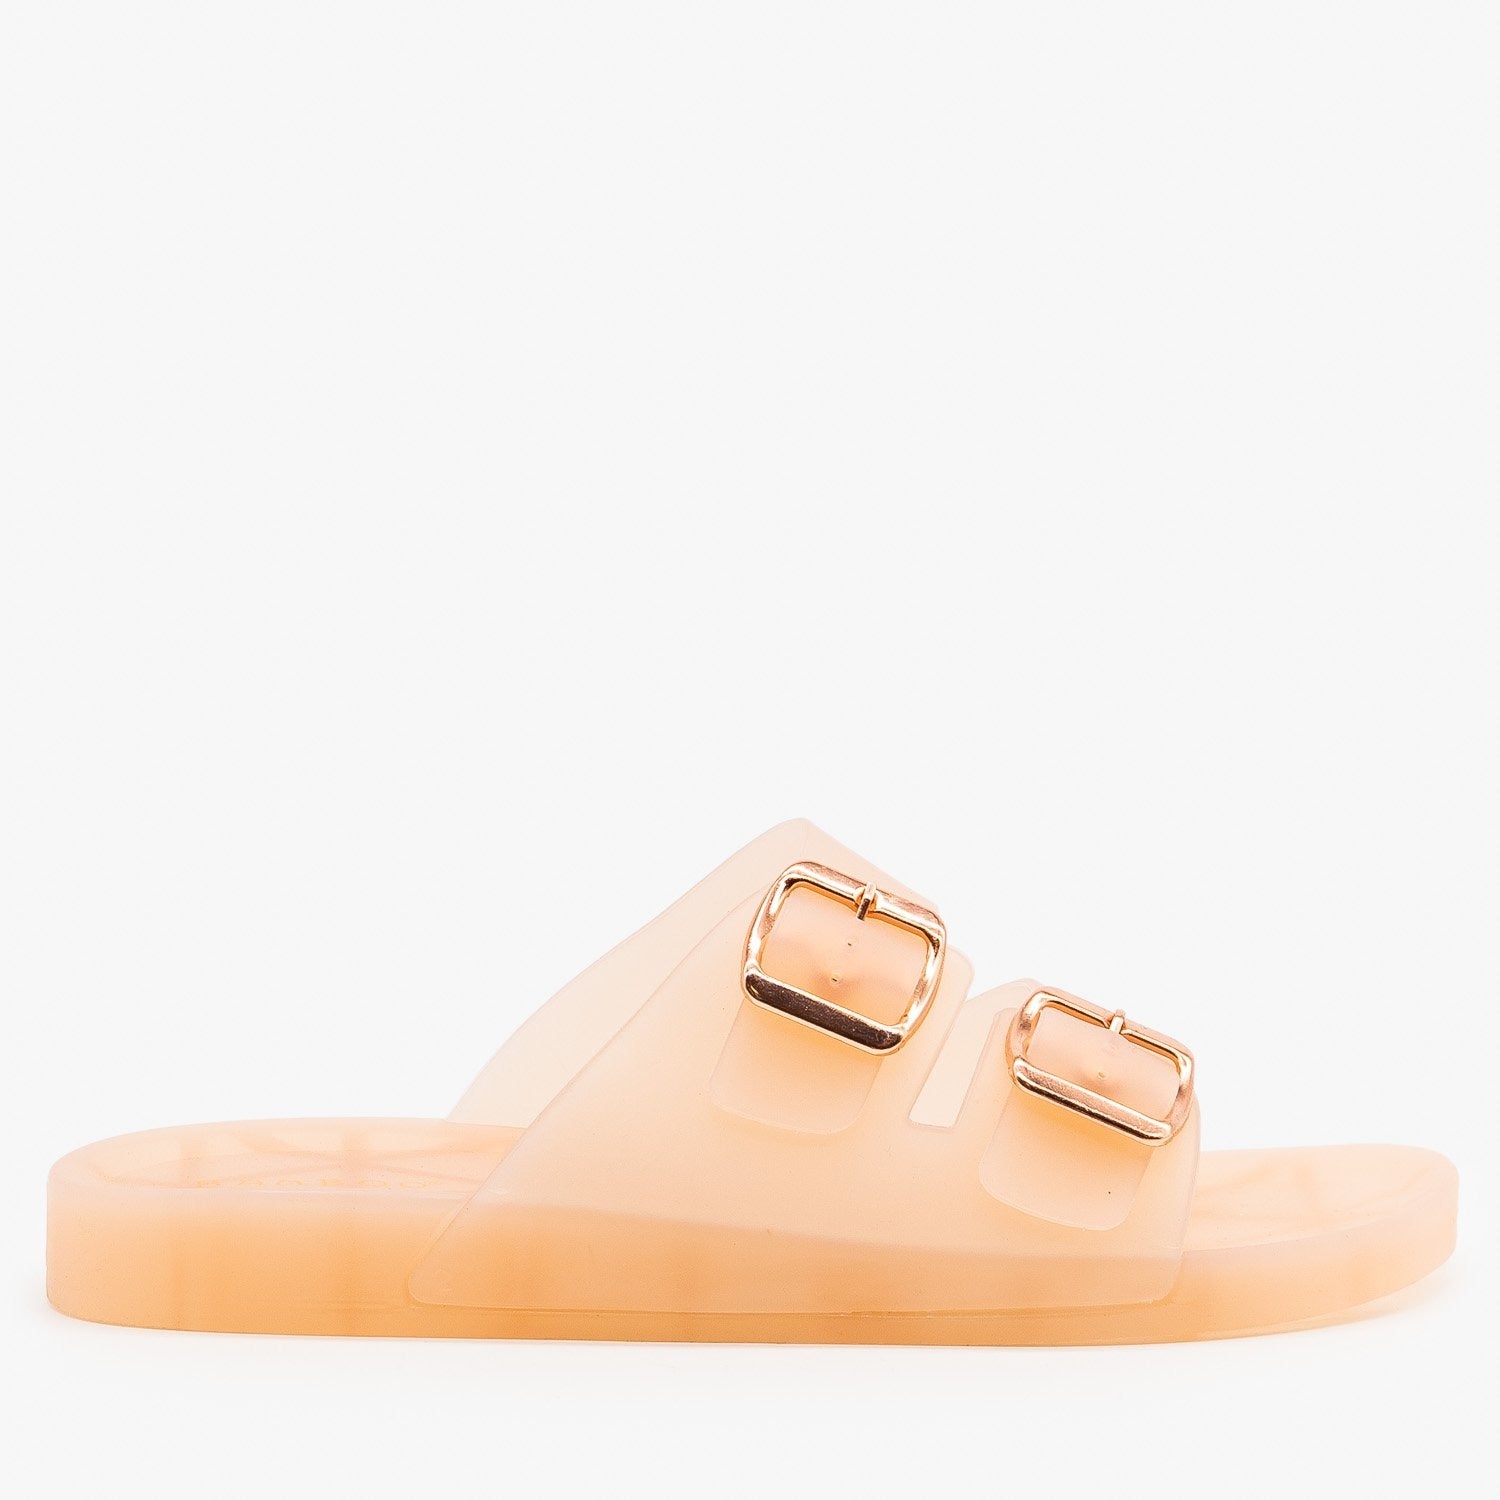 bamboo jelly shoes